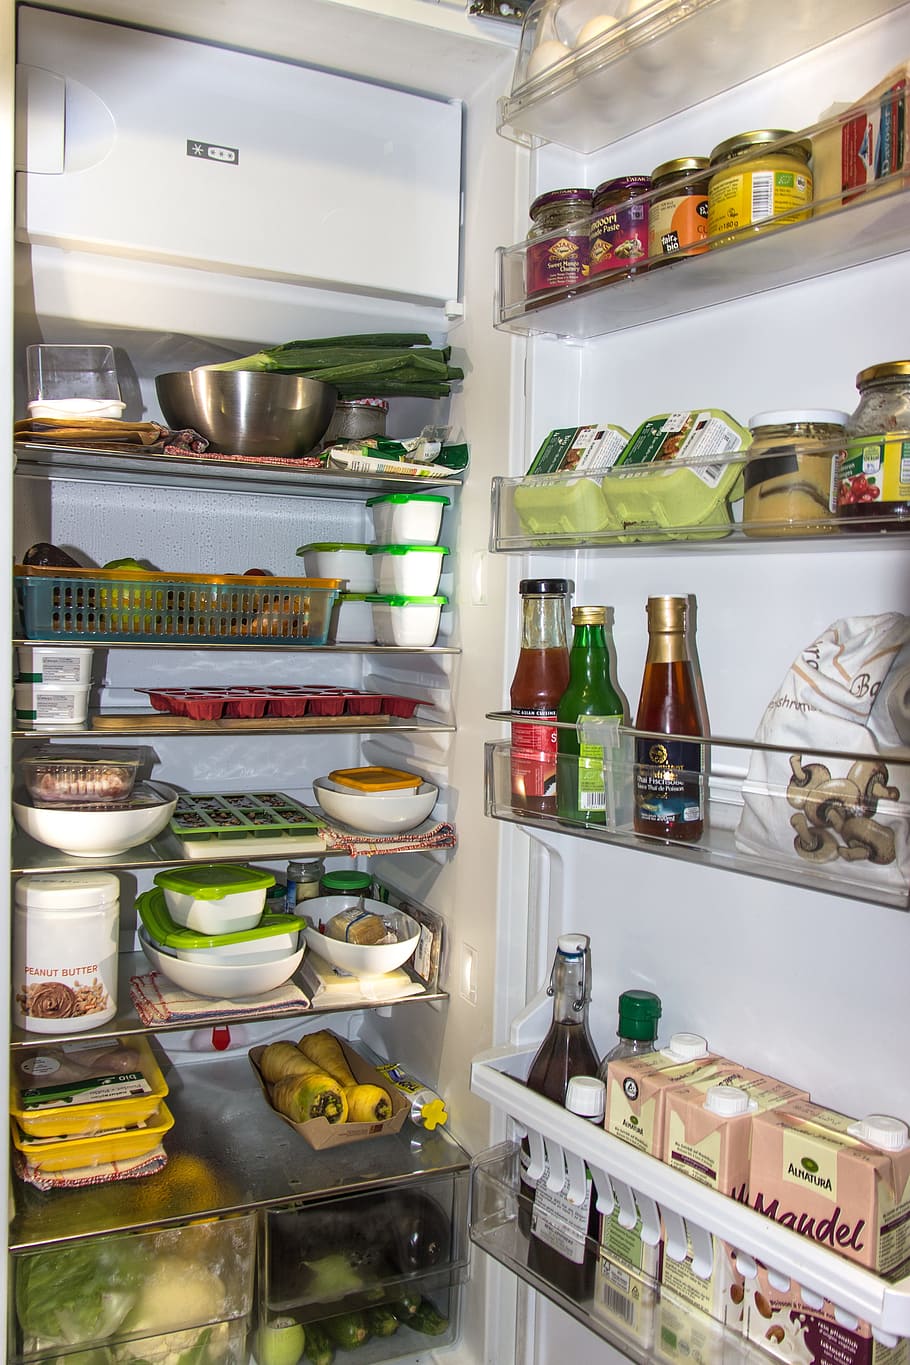 A clean and organized refrigerator interior.